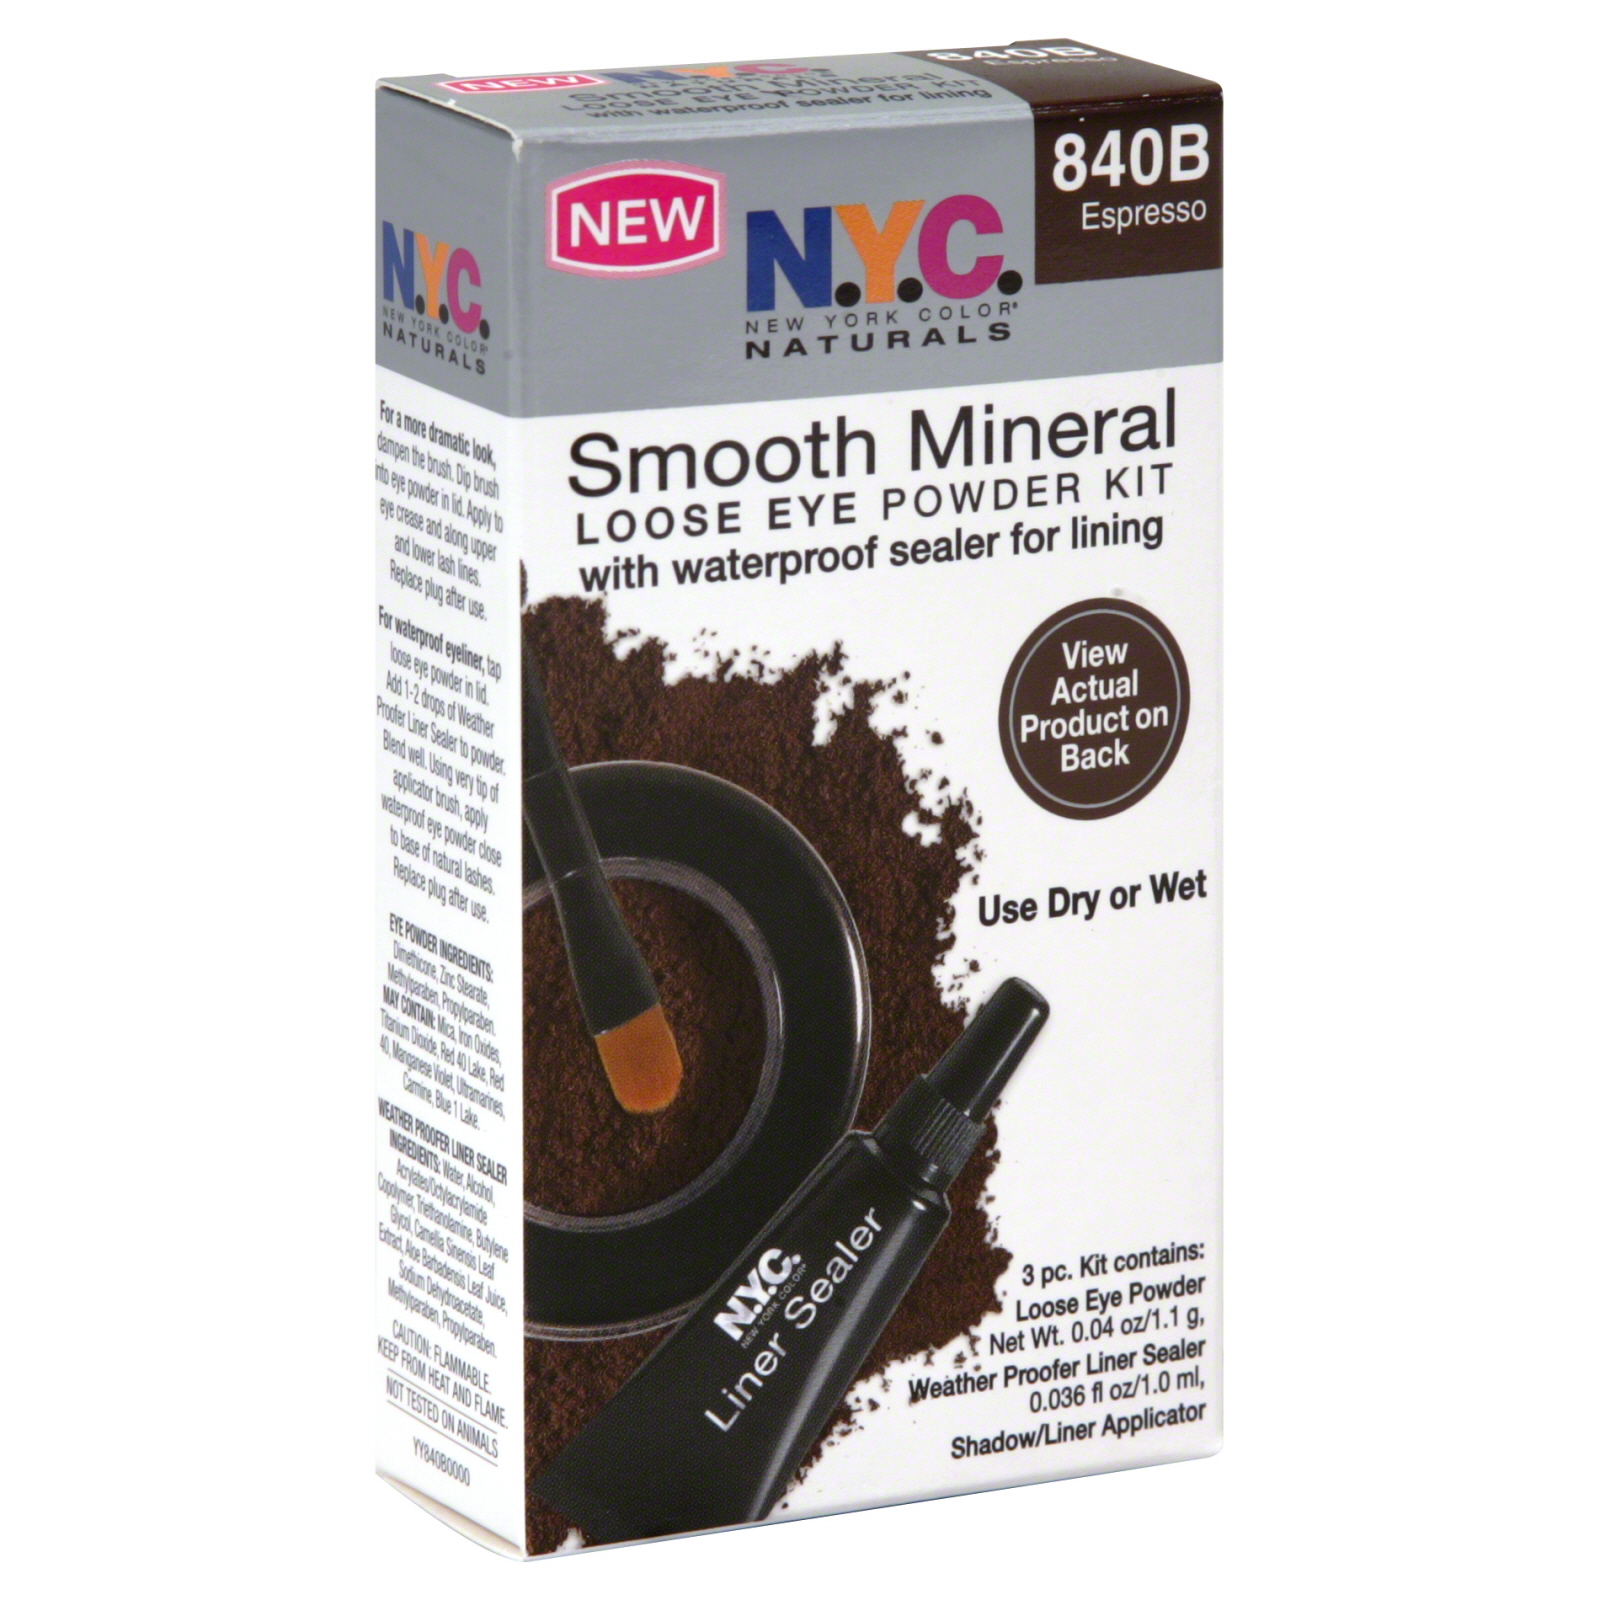 New York Color Smooth Mineral Loose Eye Powder Kit